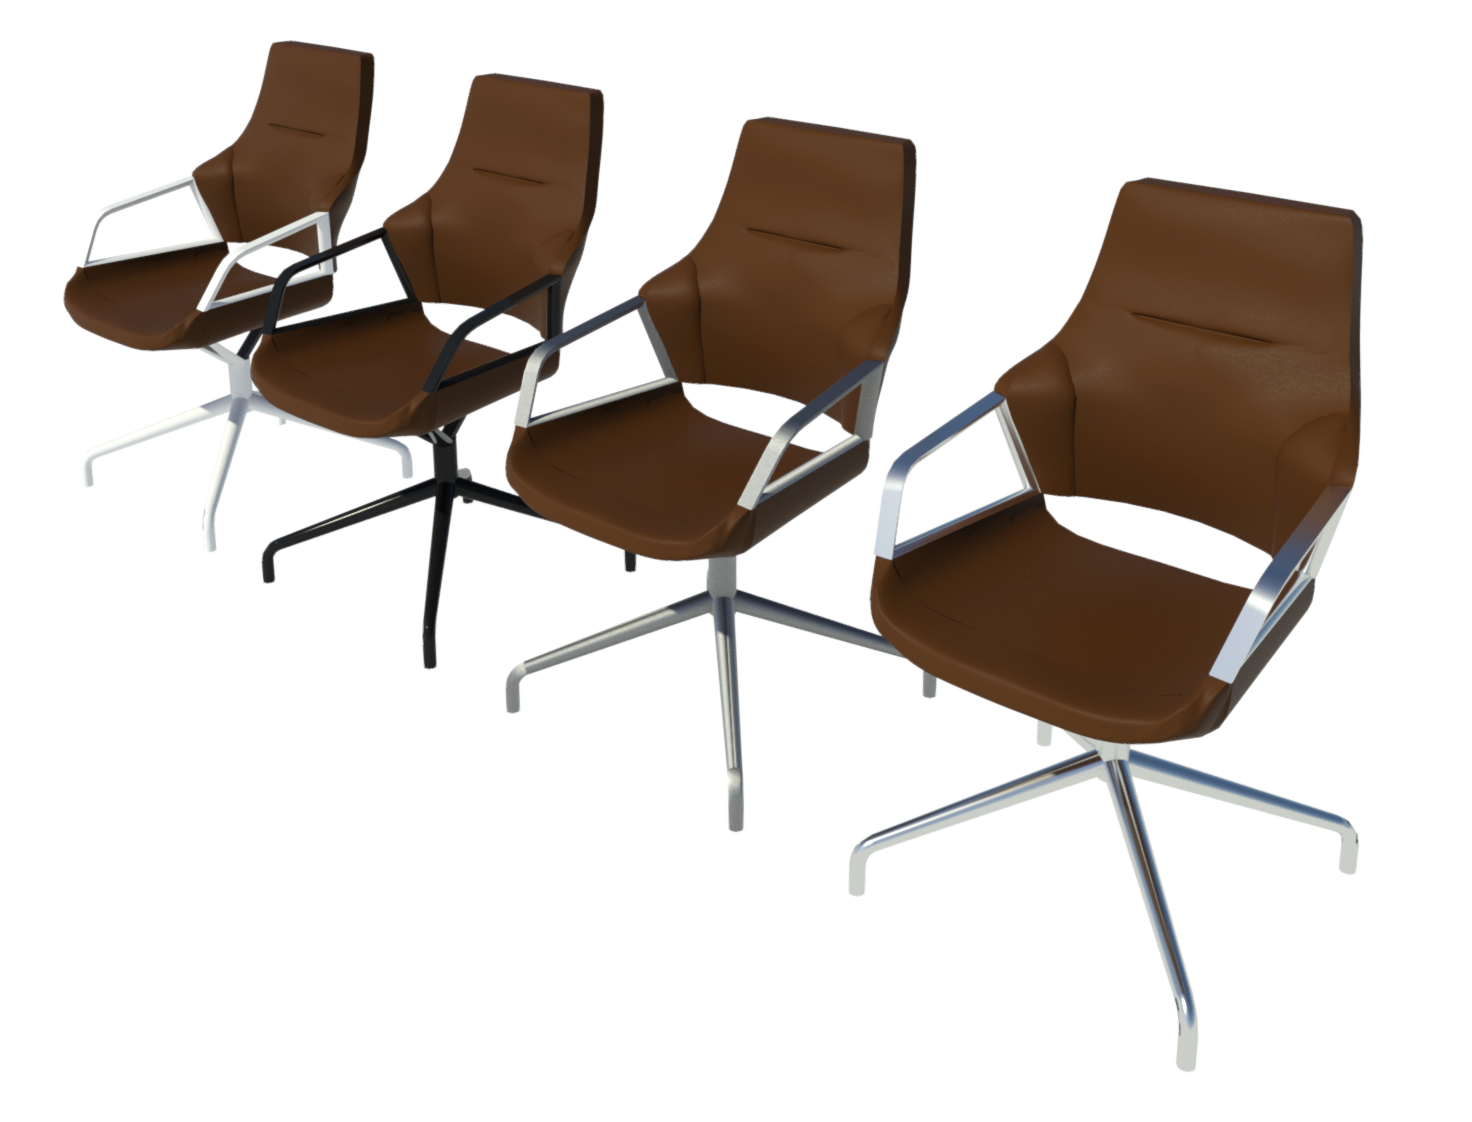 Raytrace of our Graph chair Revit family showing the Mandel Brown upholstered chair with four material options for the frame.